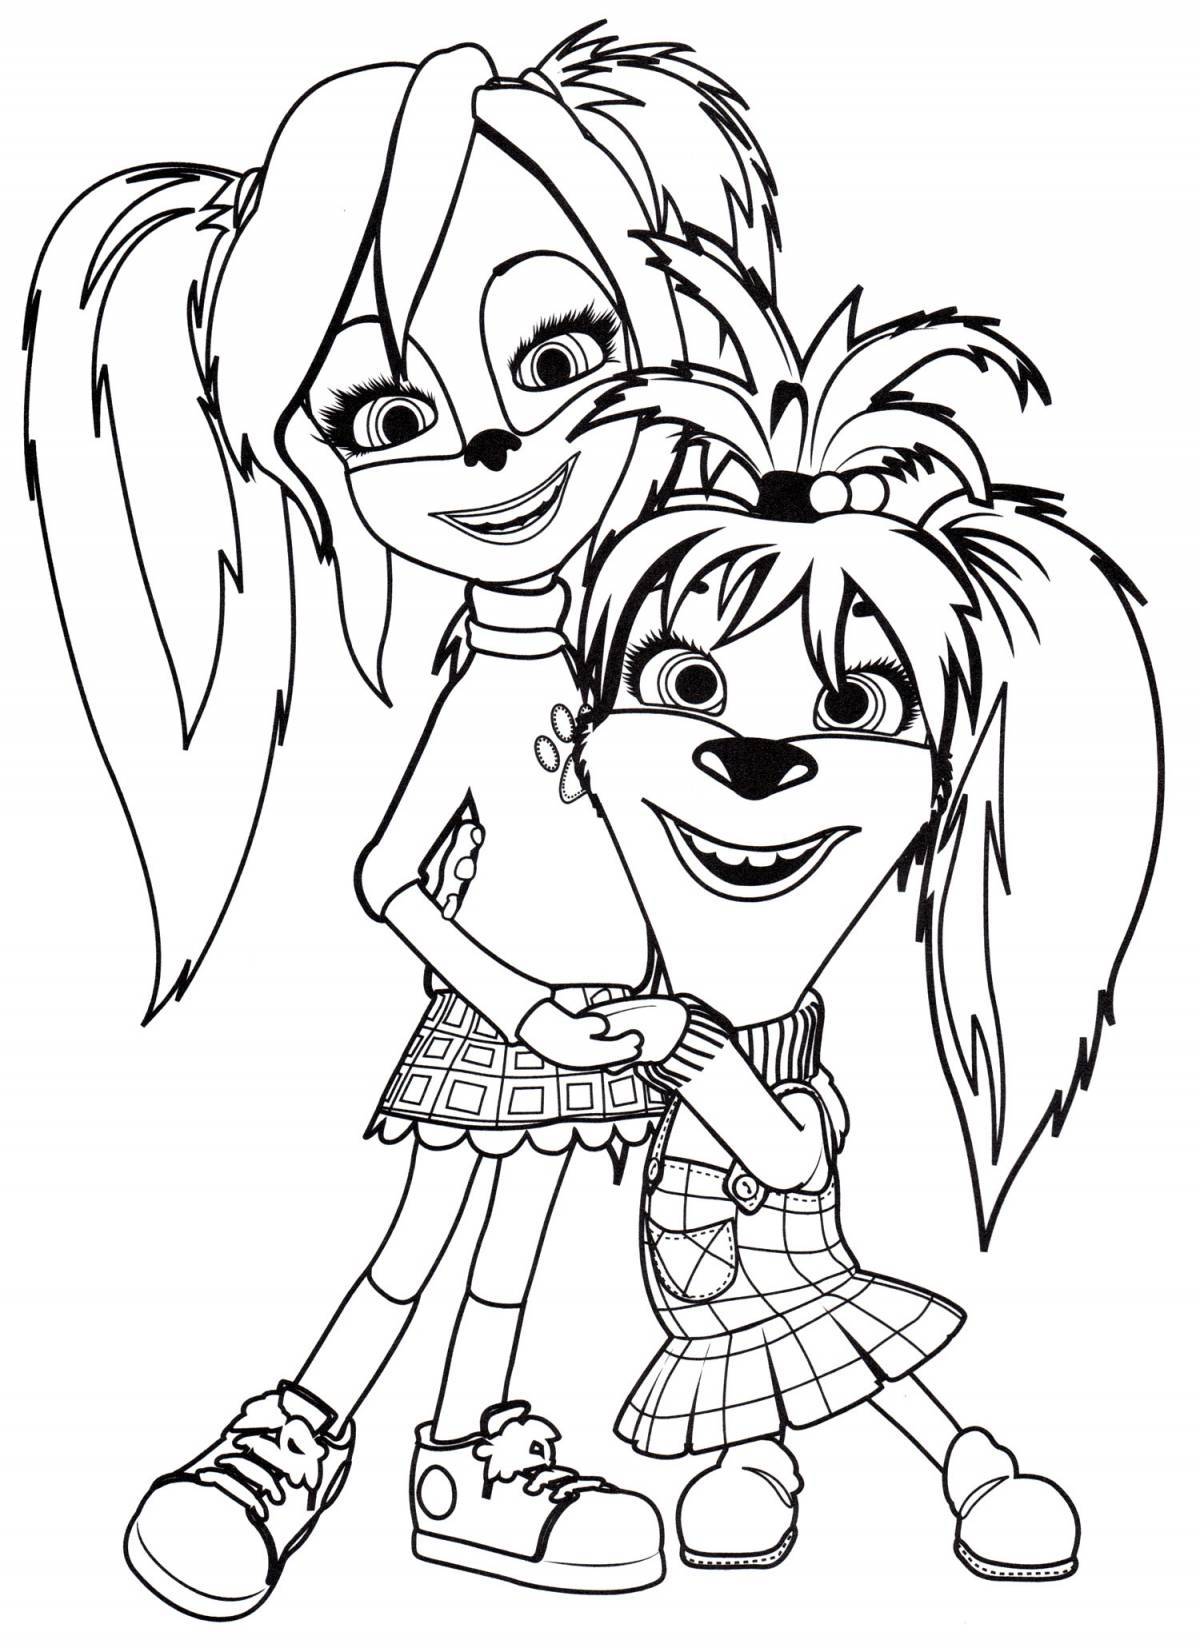 Funny barboskin coloring pages for kids